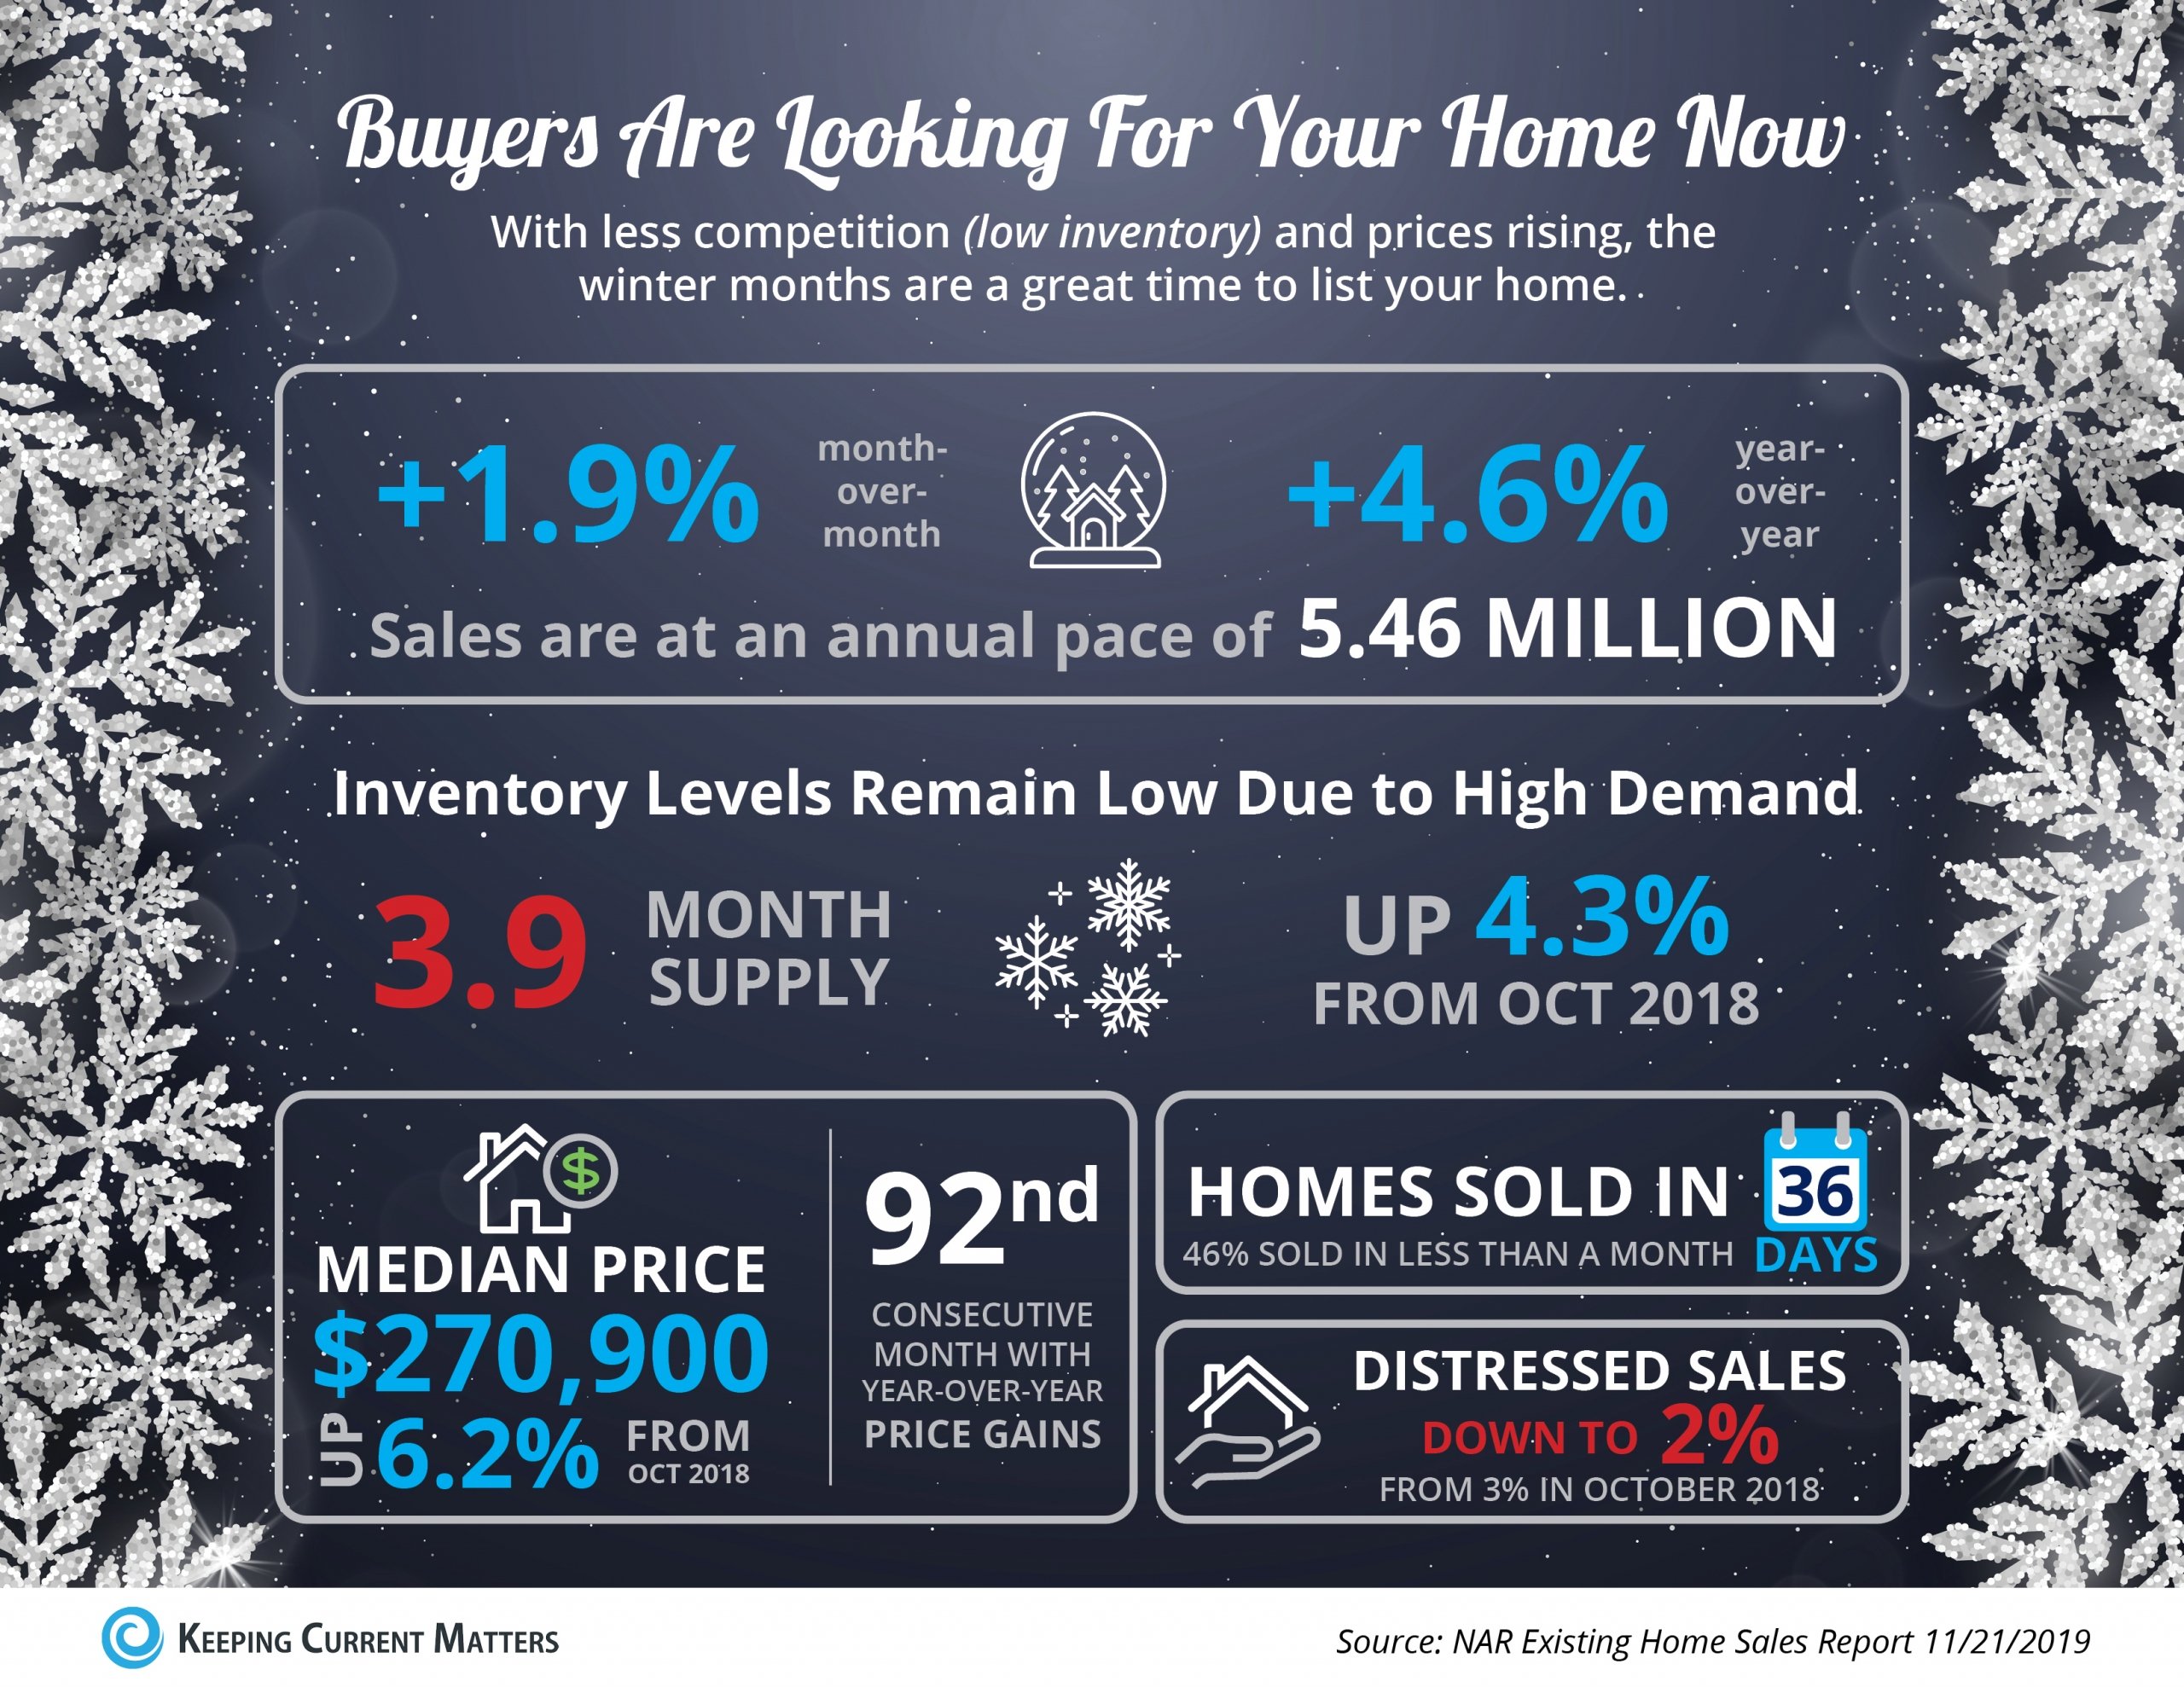 Buyers are Looking for Your Home